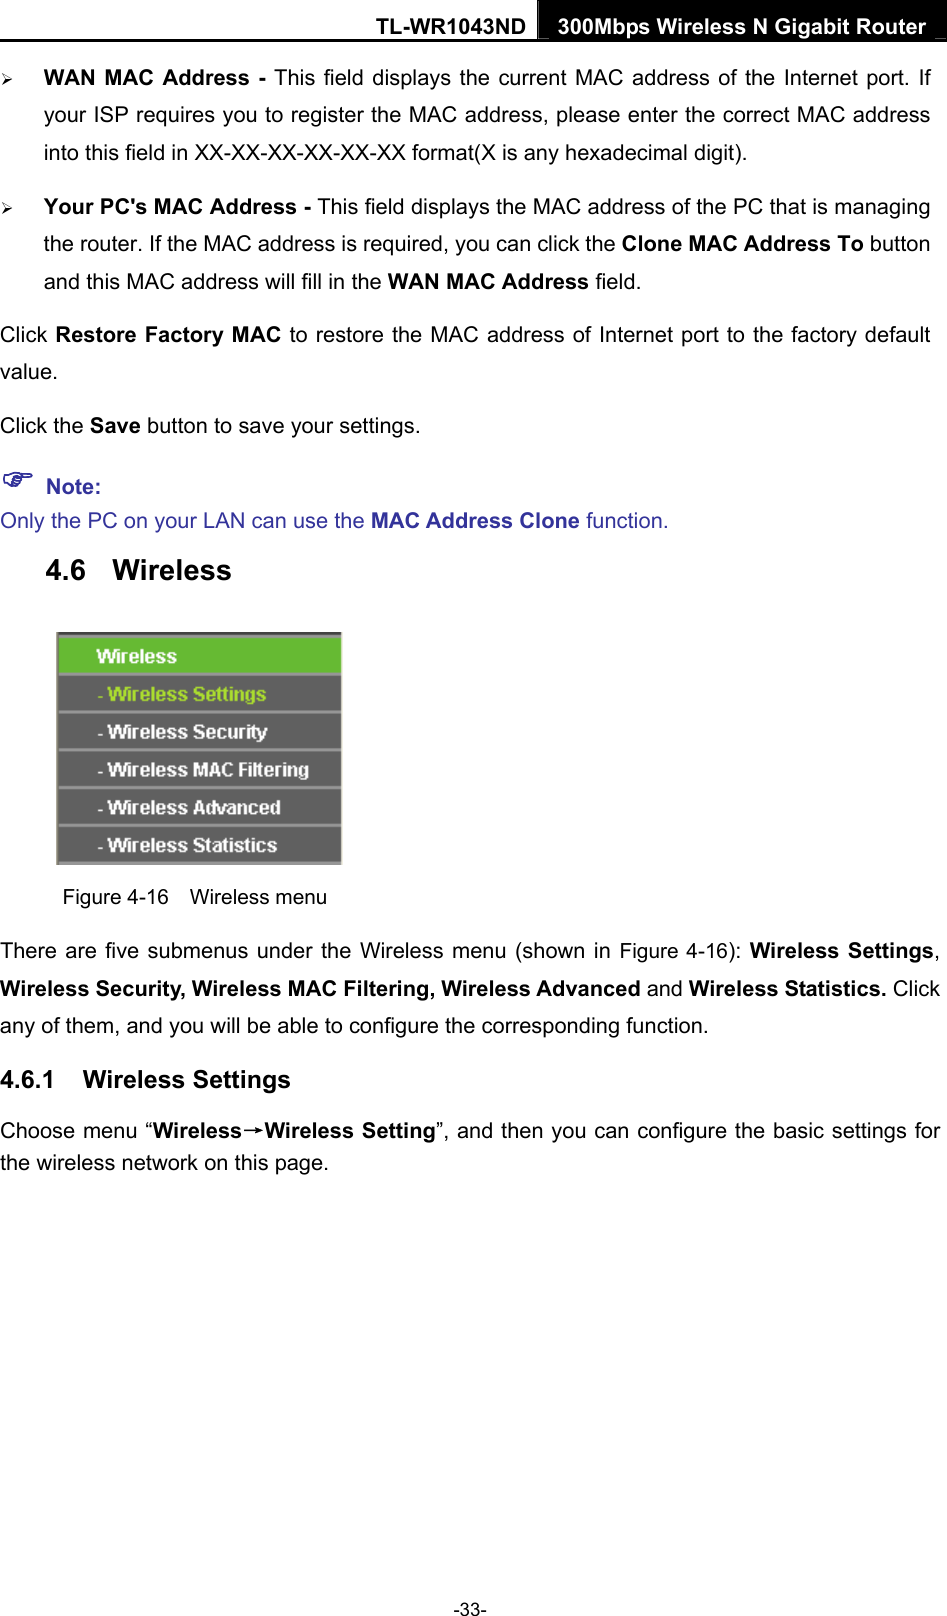 TL-WR1043ND 300Mbps Wireless N Gigabit Router  ¾ WAN MAC Address - This field displays the current MAC address of the Internet port. If your ISP requires you to register the MAC address, please enter the correct MAC address into this field in XX-XX-XX-XX-XX-XX format(X is any hexadecimal digit).   ¾ Your PC&apos;s MAC Address - This field displays the MAC address of the PC that is managing the router. If the MAC address is required, you can click the Clone MAC Address To button and this MAC address will fill in the WAN MAC Address field. Click Restore Factory MAC to restore the MAC address of Internet port to the factory default value. Click the Save button to save your settings. ) Note:  Only the PC on your LAN can use the MAC Address Clone function. 4.6  Wireless  Figure 4-16  Wireless menu There are five submenus under the Wireless menu (shown in Figure 4-16):  Wireless Settings, Wireless Security, Wireless MAC Filtering, Wireless Advanced and Wireless Statistics. Click any of them, and you will be able to configure the corresponding function.   4.6.1  Wireless Settings Choose menu “Wireless→Wireless Setting”, and then you can configure the basic settings for the wireless network on this page. -33- 